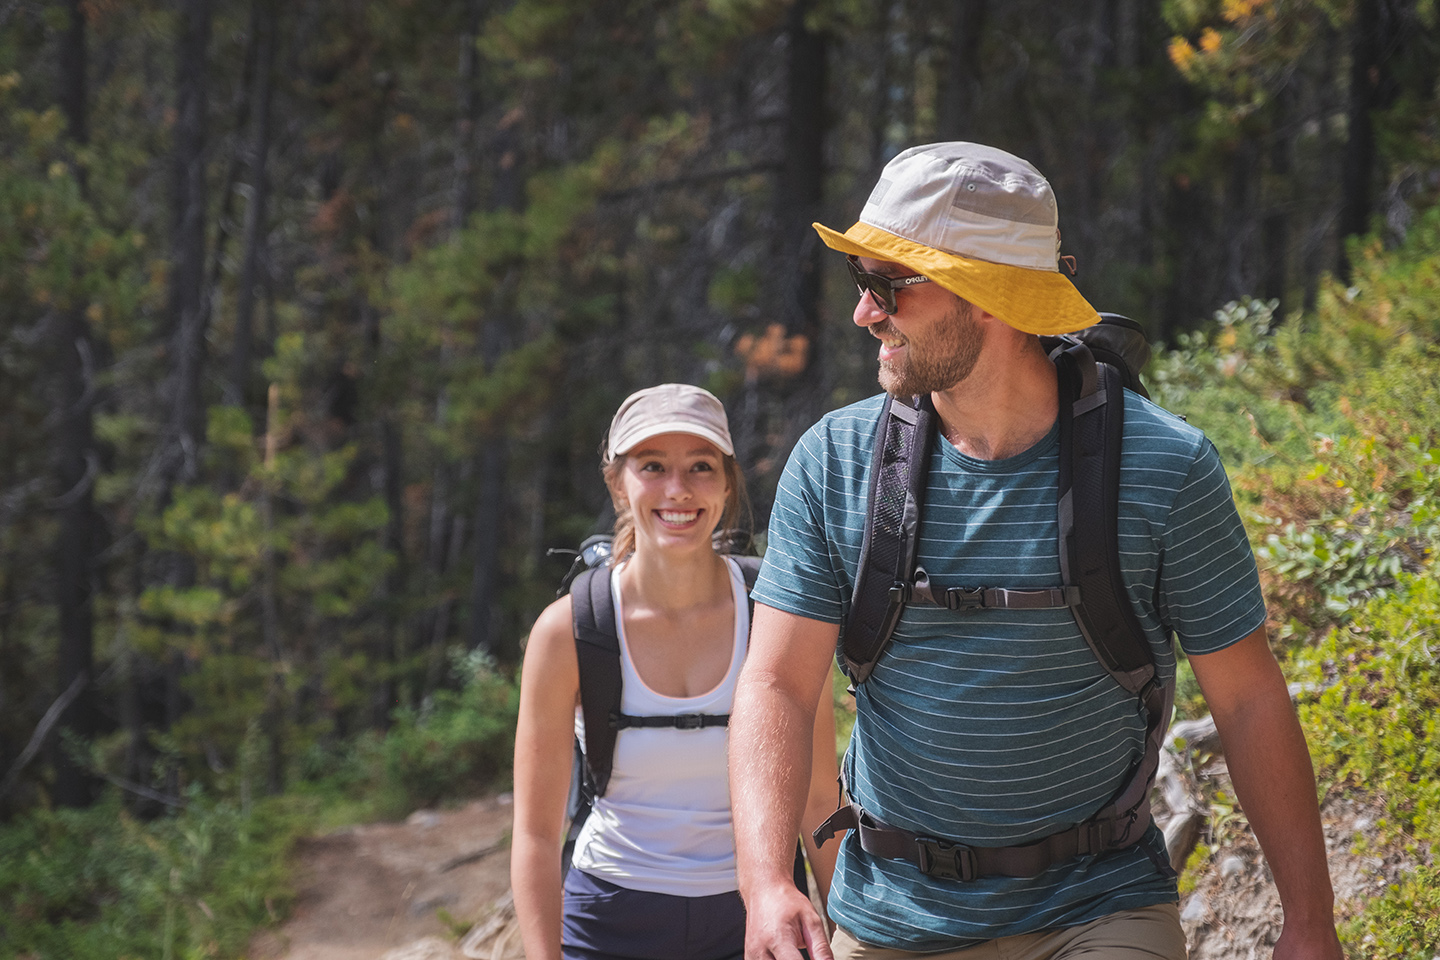 BUFF® UK on Twitter: "With temperatures warming, there's excuse get outdoors and as much as you can. Don't forget to pack your Sun Bucket Hat or Pack Trek